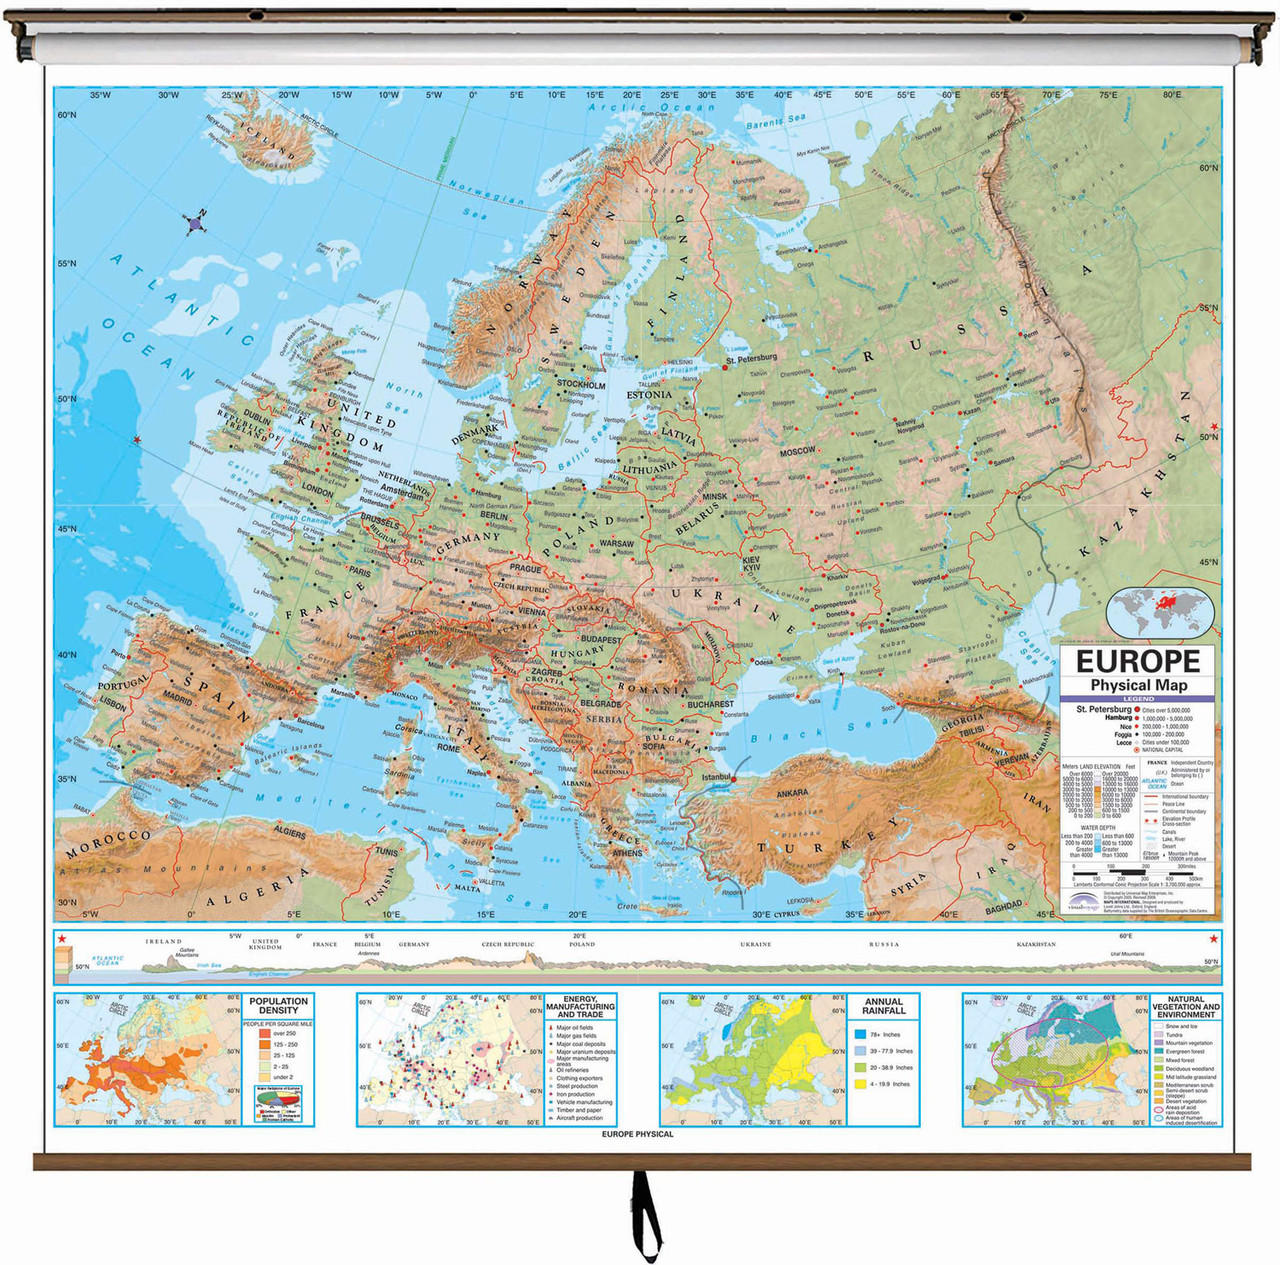 Europe Physical Map from Kappa | World Maps Online